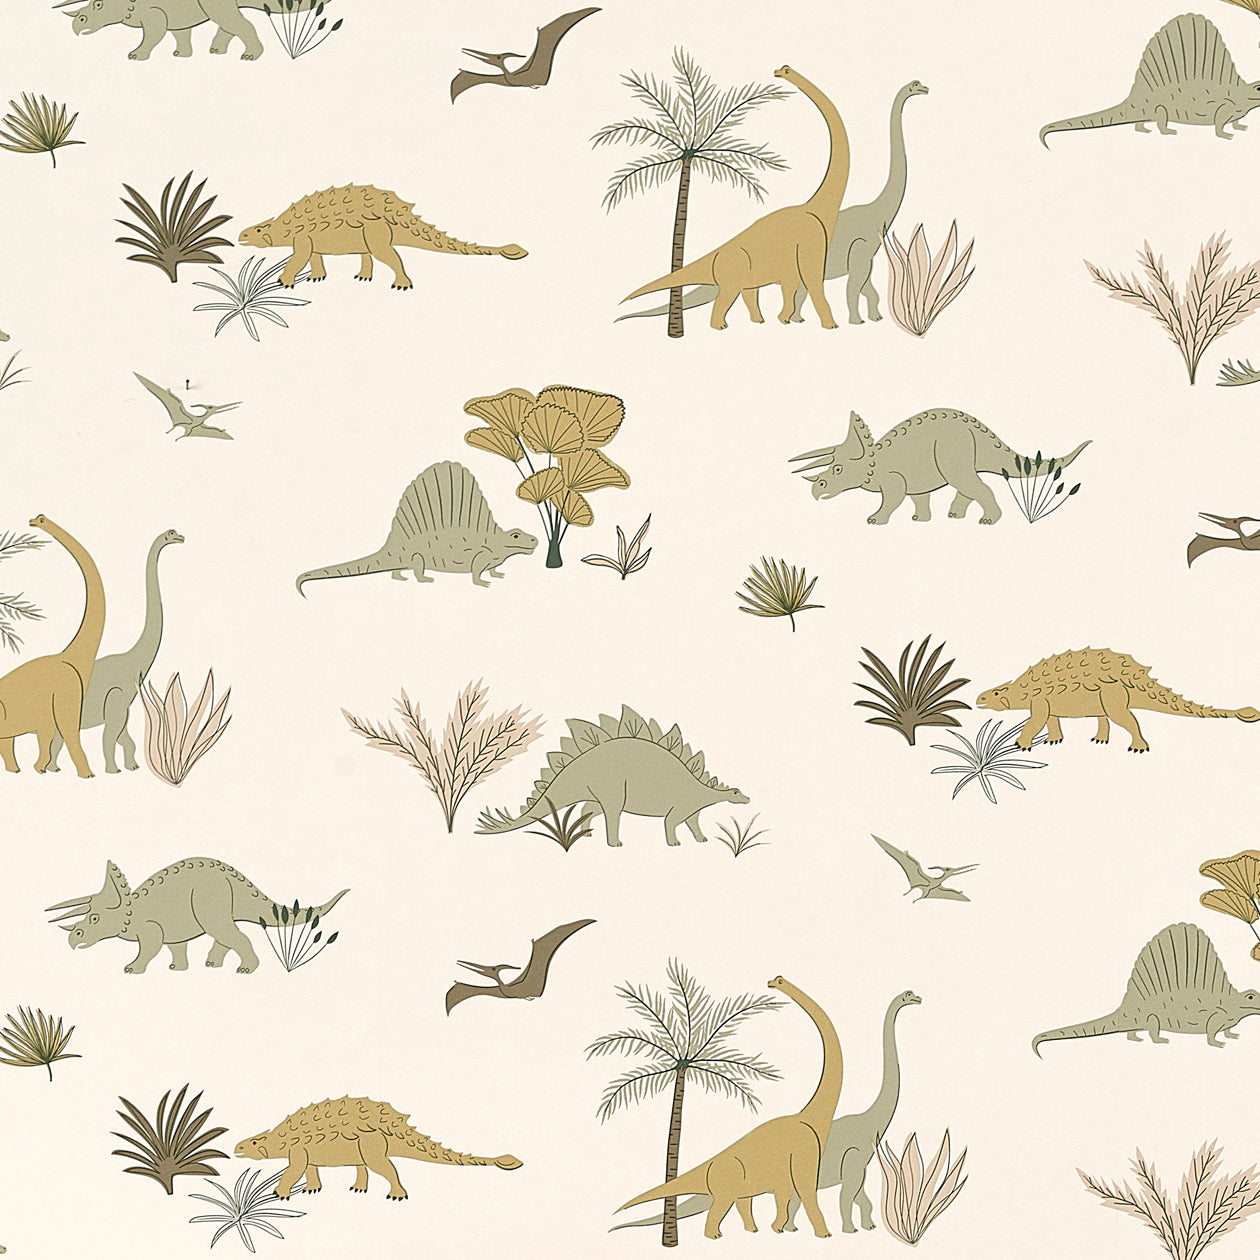 Detail of a pattern with illustrated Dinosauces, in green, brown and tan.